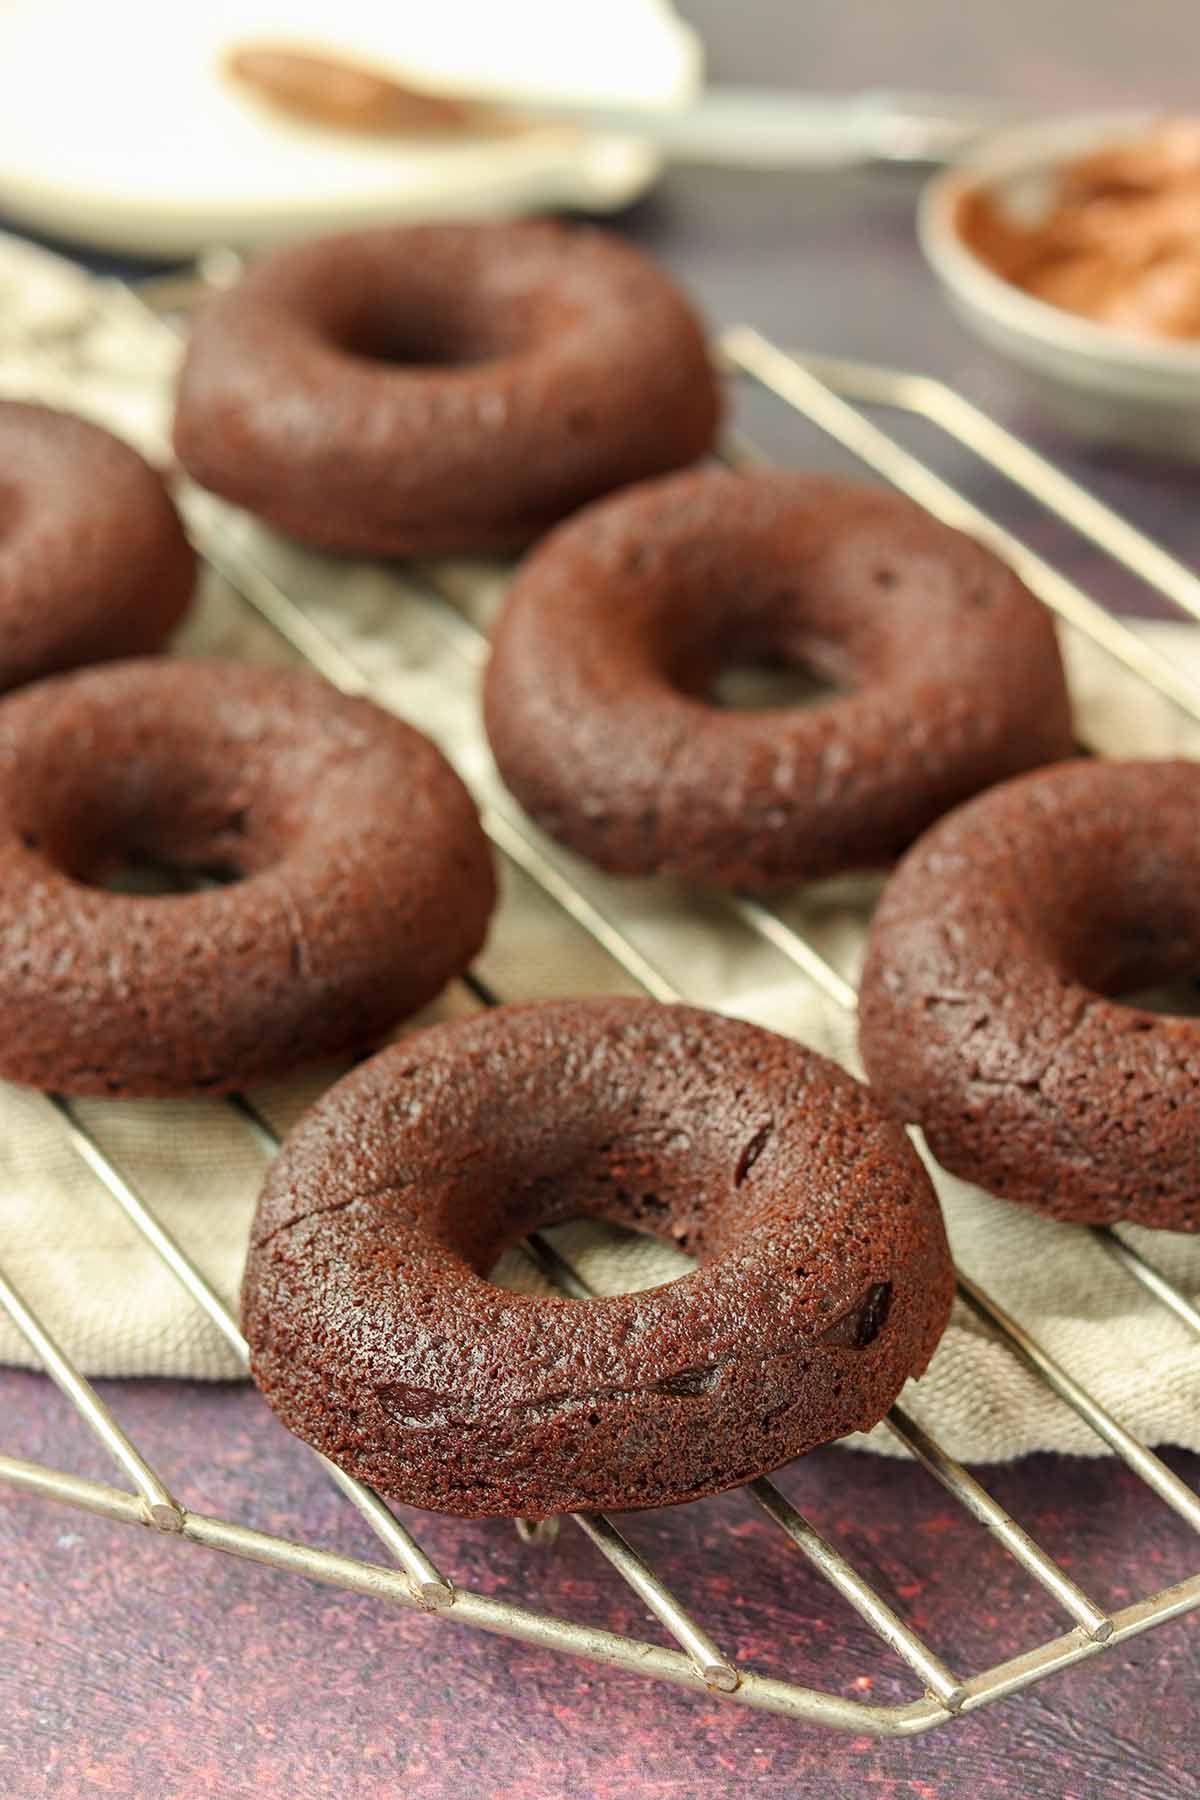 Chocolate cassava flour donuts lined up on a wire cooling rack surrounded by ingredients.